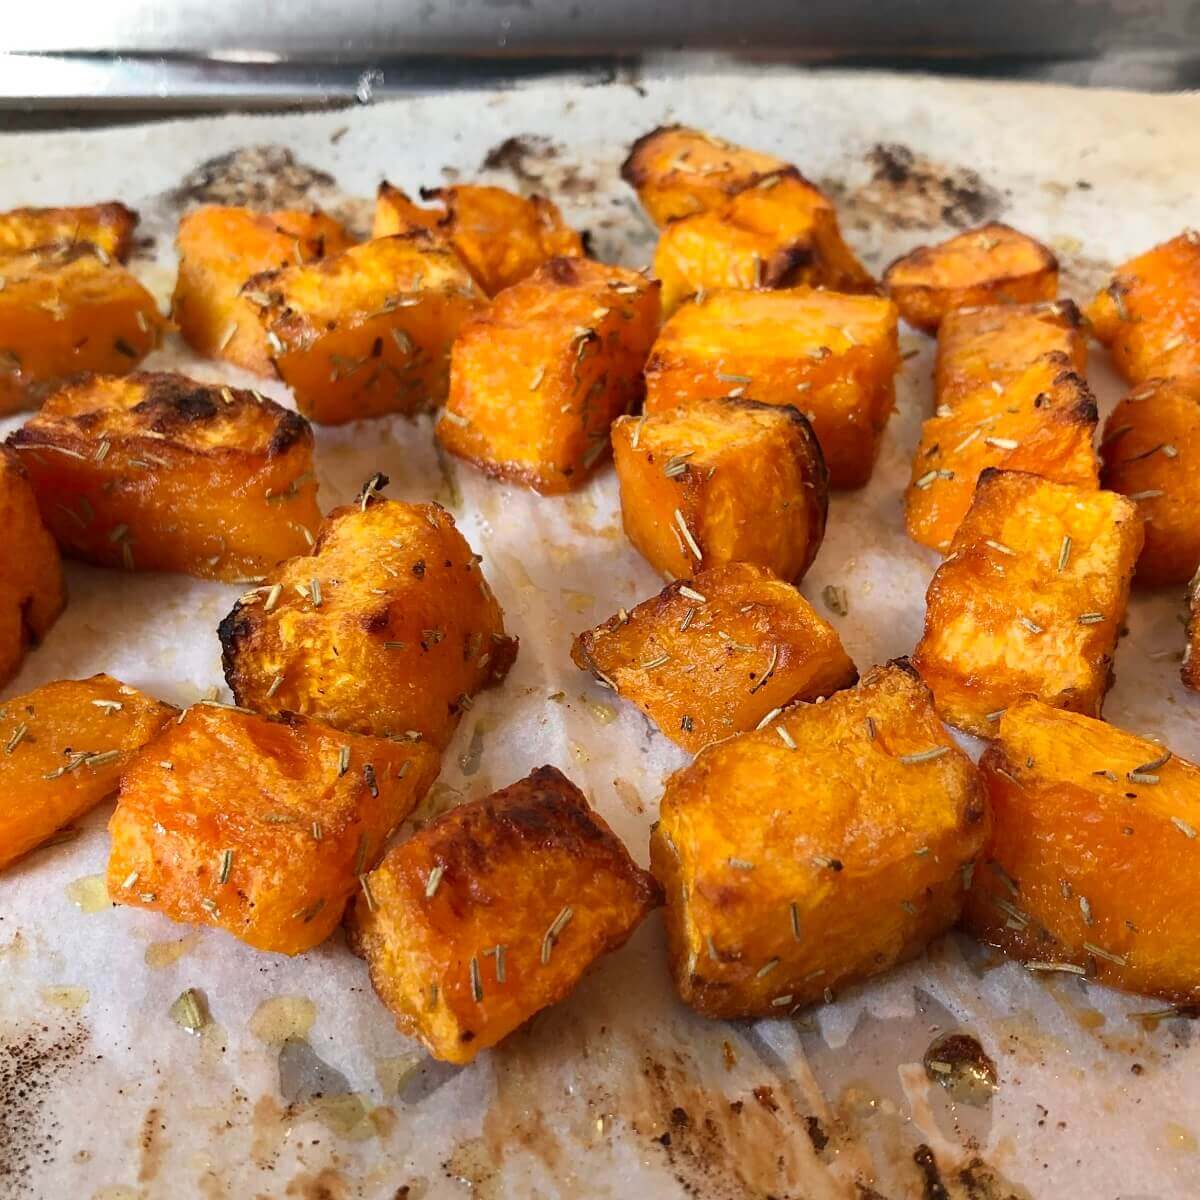 Roasted sweet potatoes on a baking tray lined with parchment paper.